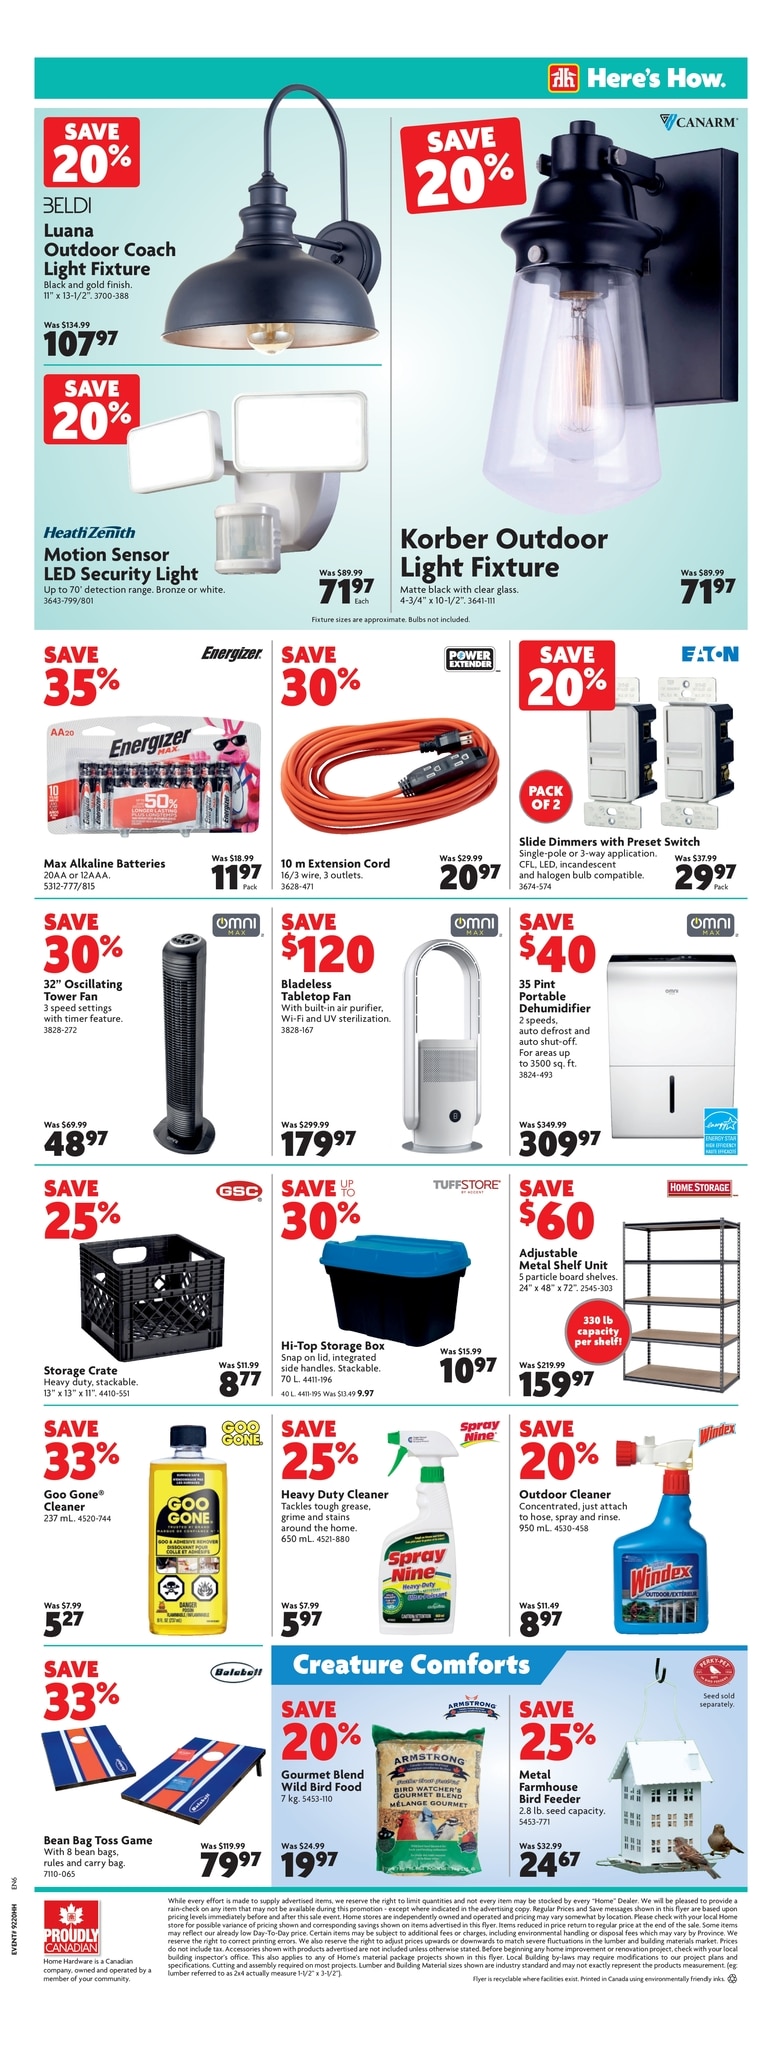 Home Hardware - Weekly Flyer Specials - Page 10